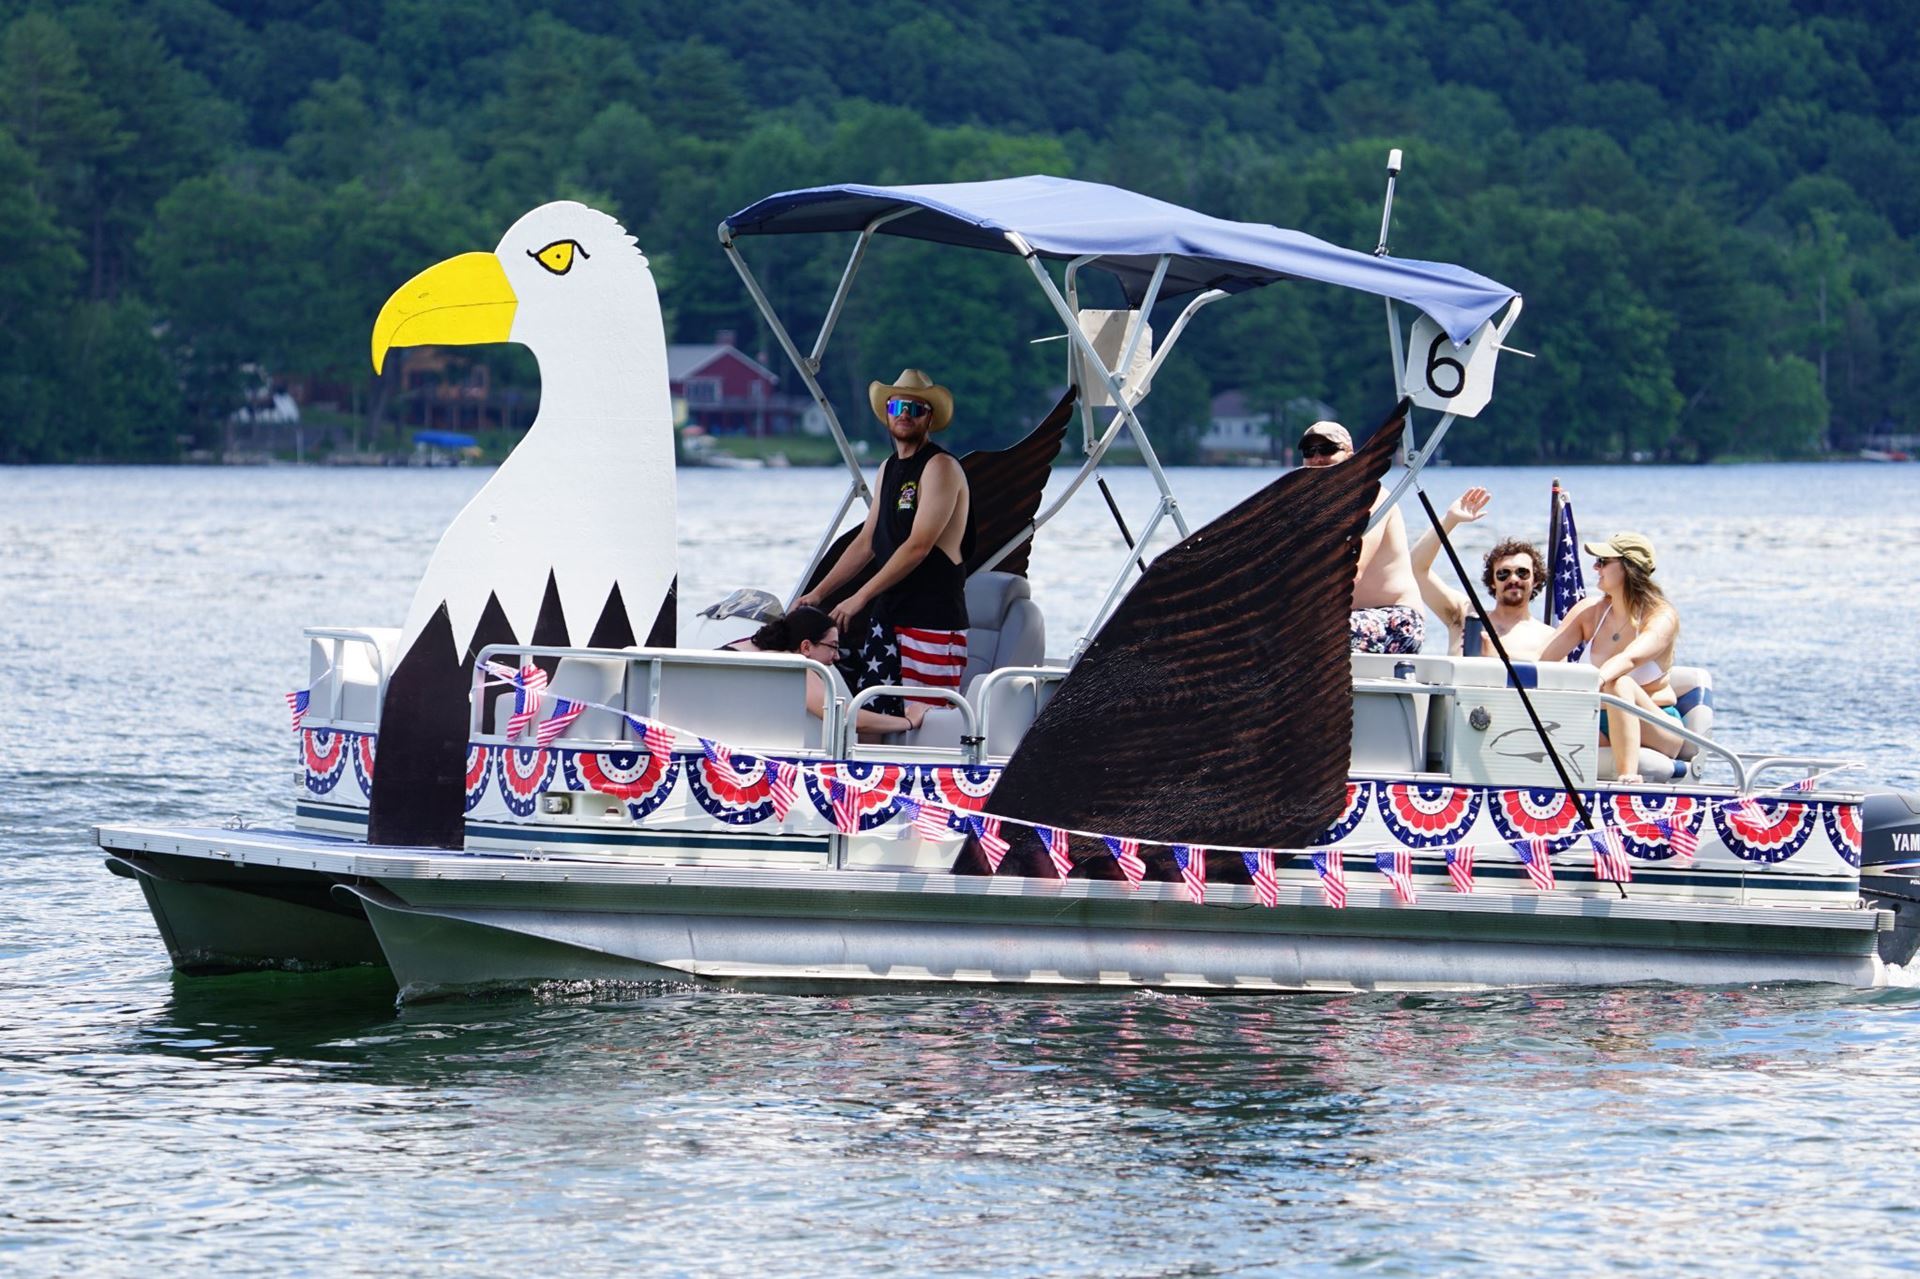 Most Patriotic: 1st Place: Boat #6 - God Bless America - Adam Wunderlich 